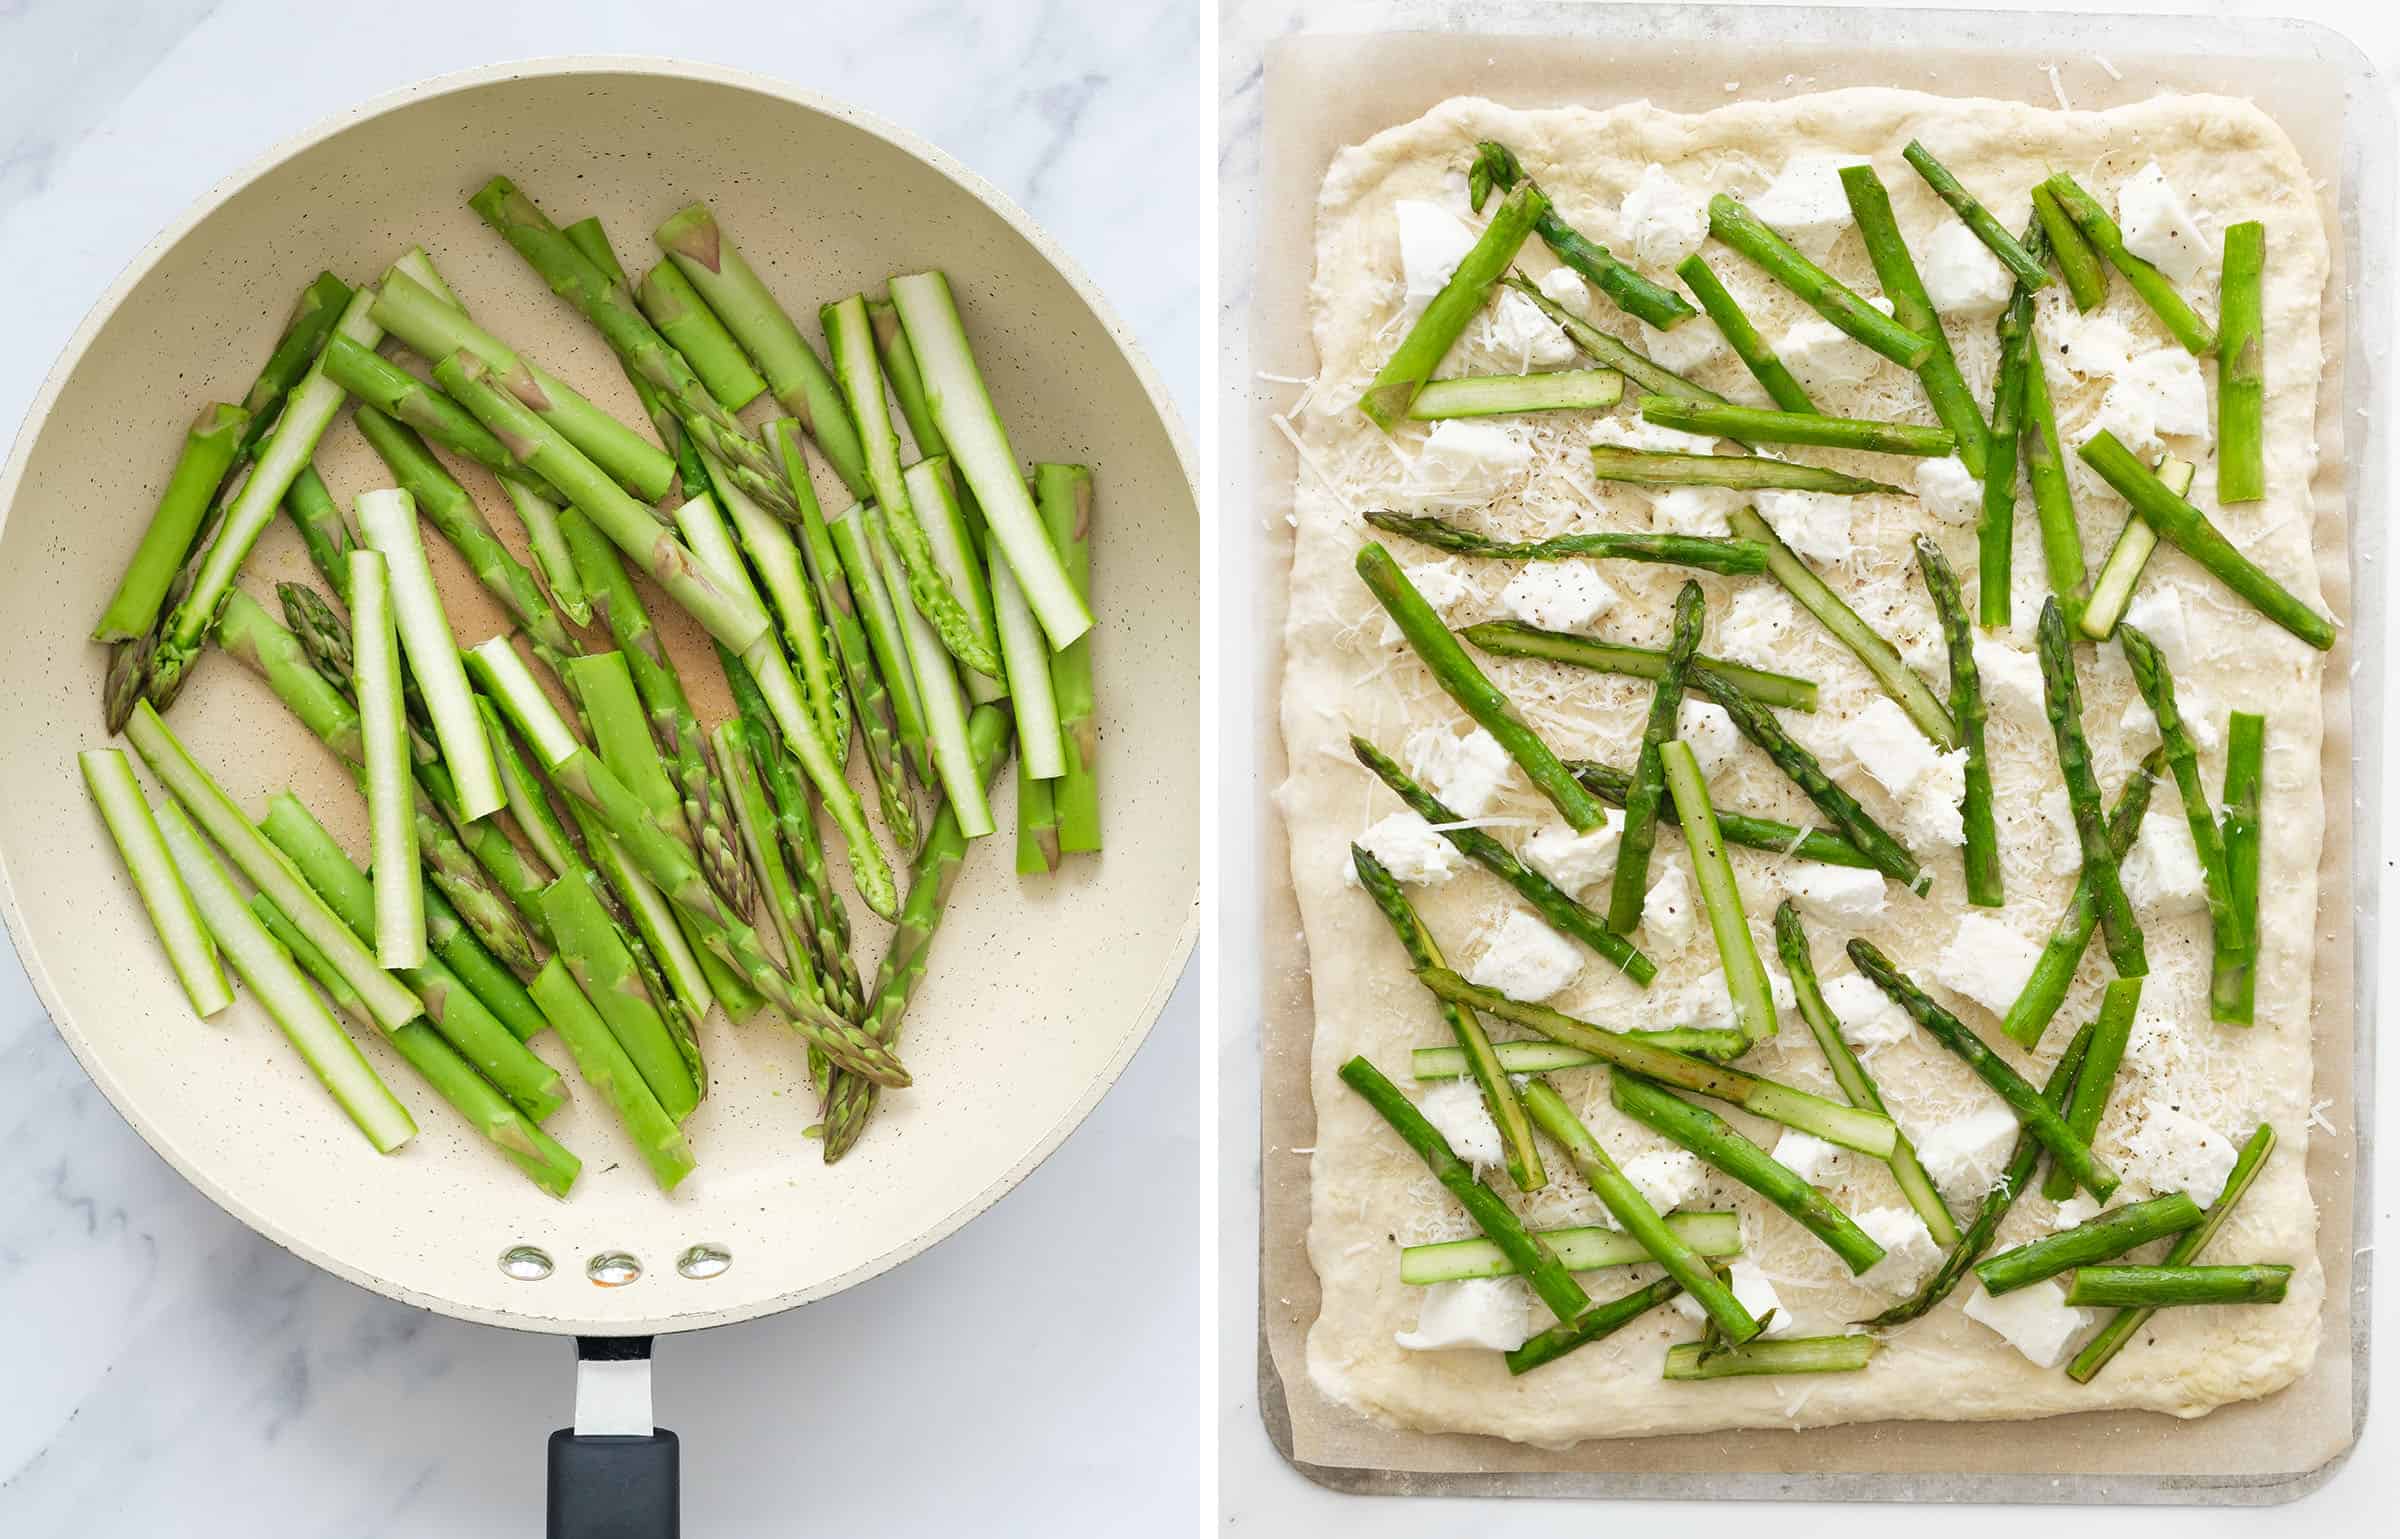 Top view of a large pan with asparagus and top view of a large pizza with cheese and asparagus before baking.